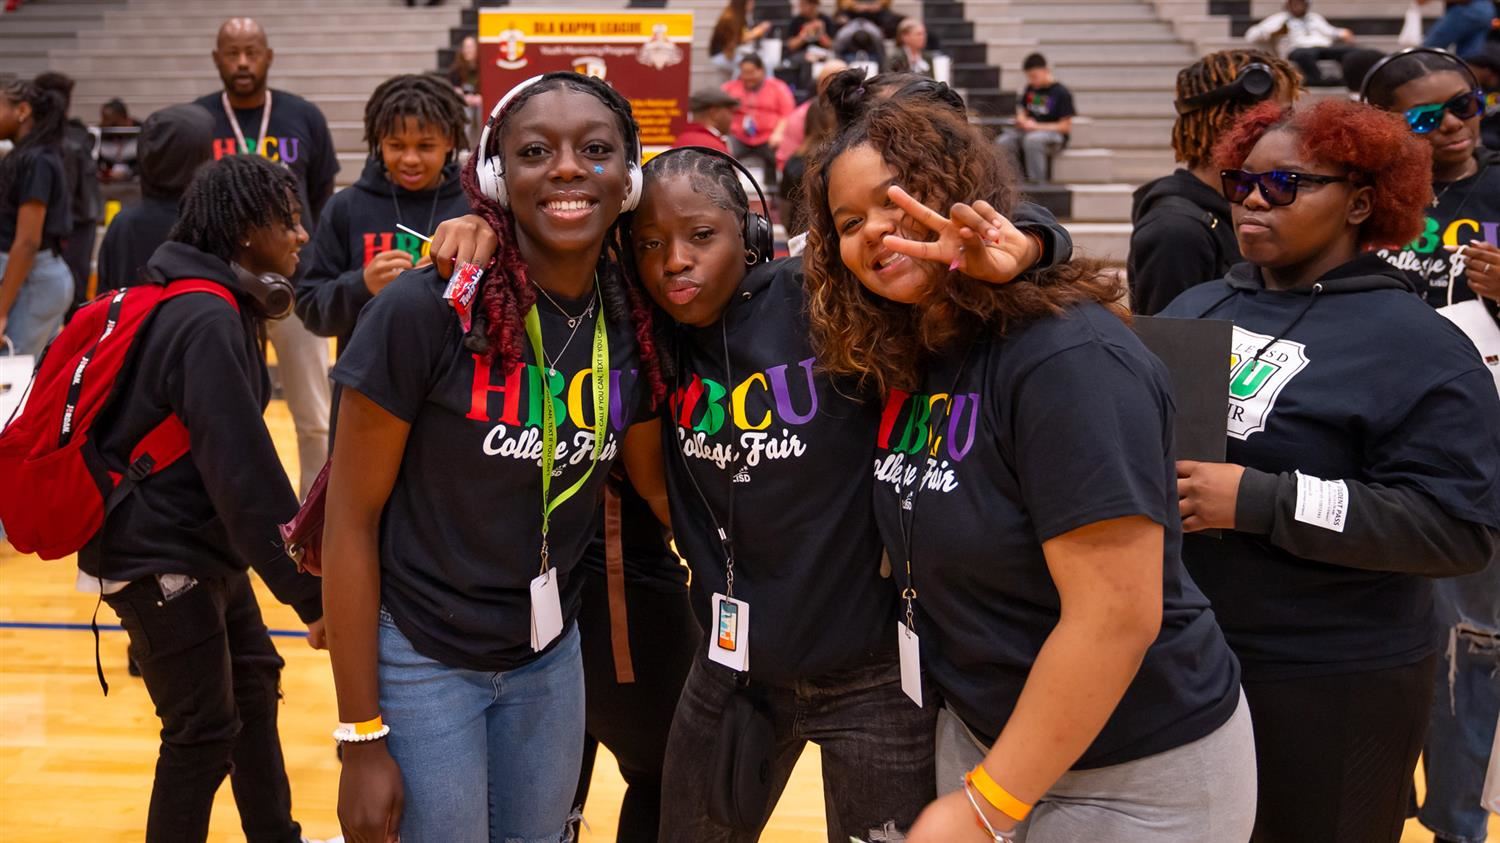 HBCU College Fair Brings Opportunities Through Connection